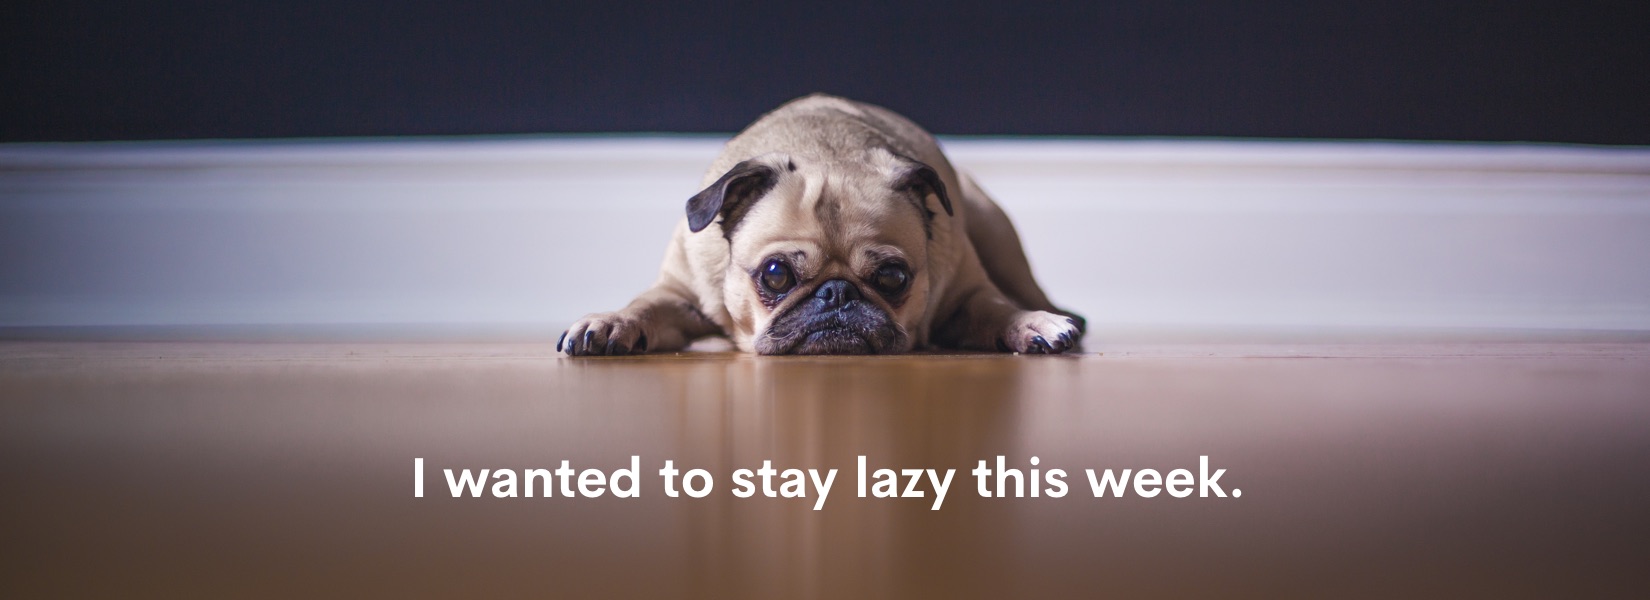 I wanted to stay lazy this week.